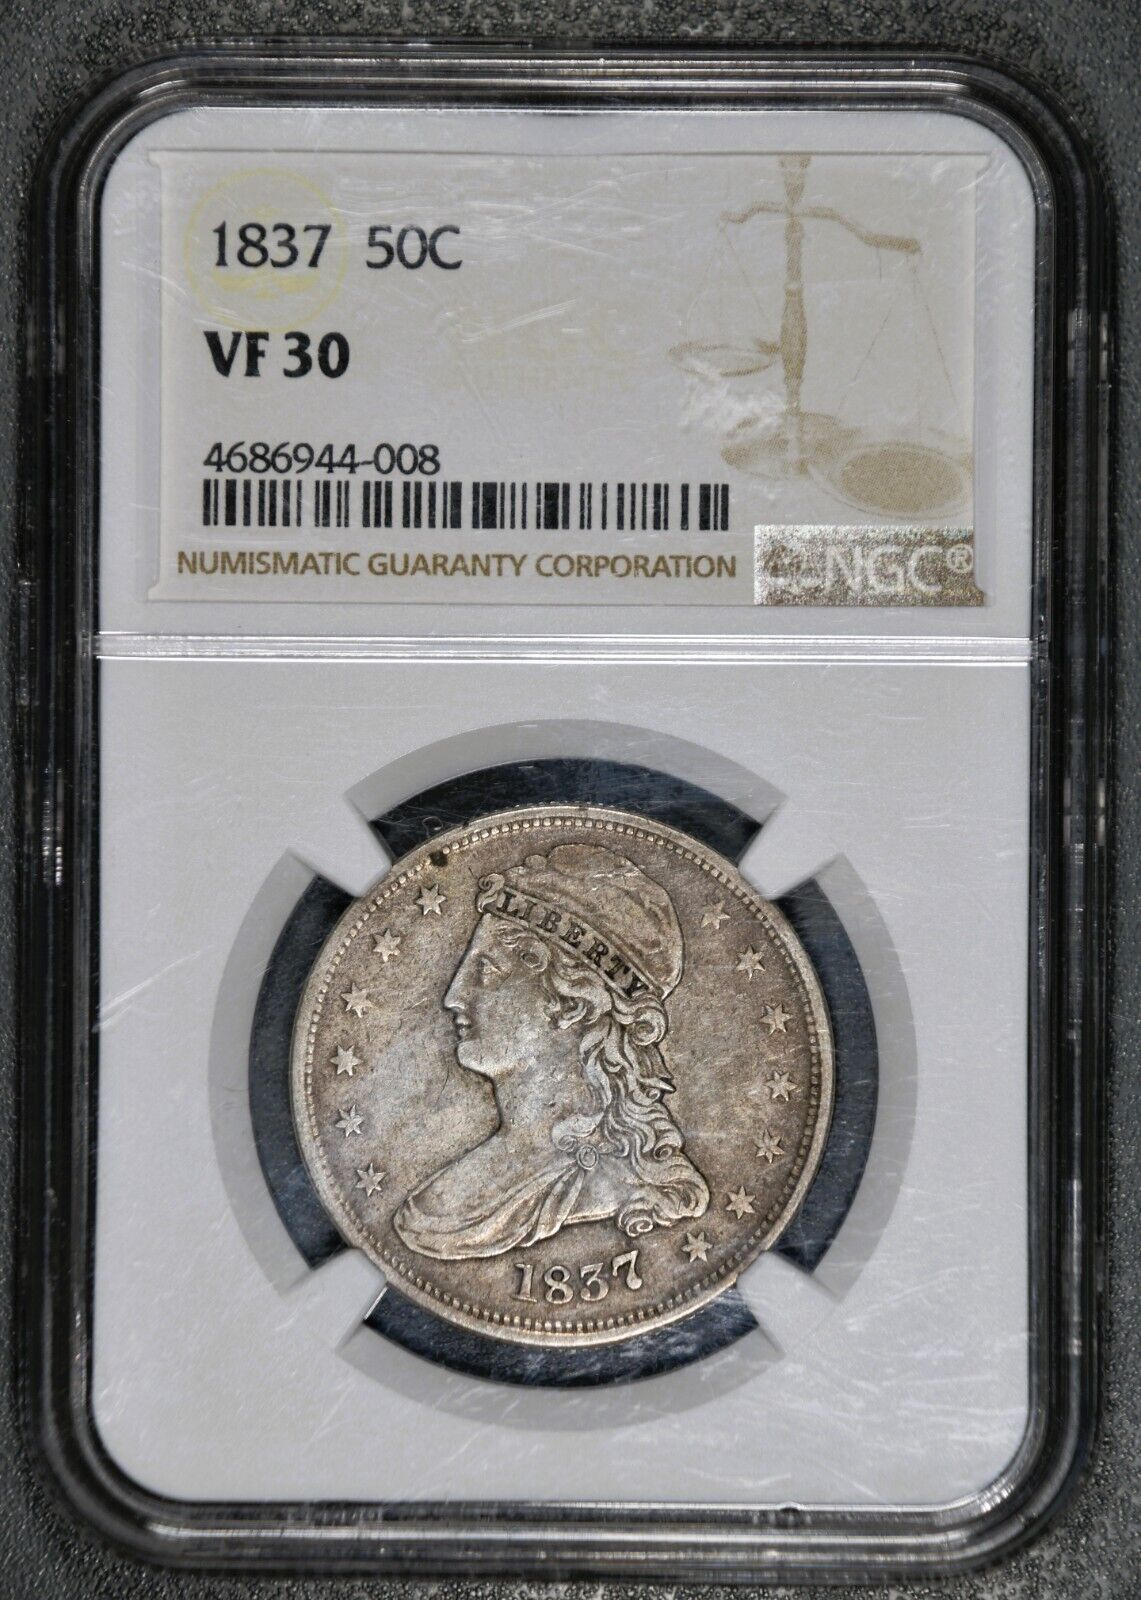 1837 Capped Bust Half Dollar 'Reeded Edge' - NGC VF30 - Nice Original Type Coin!